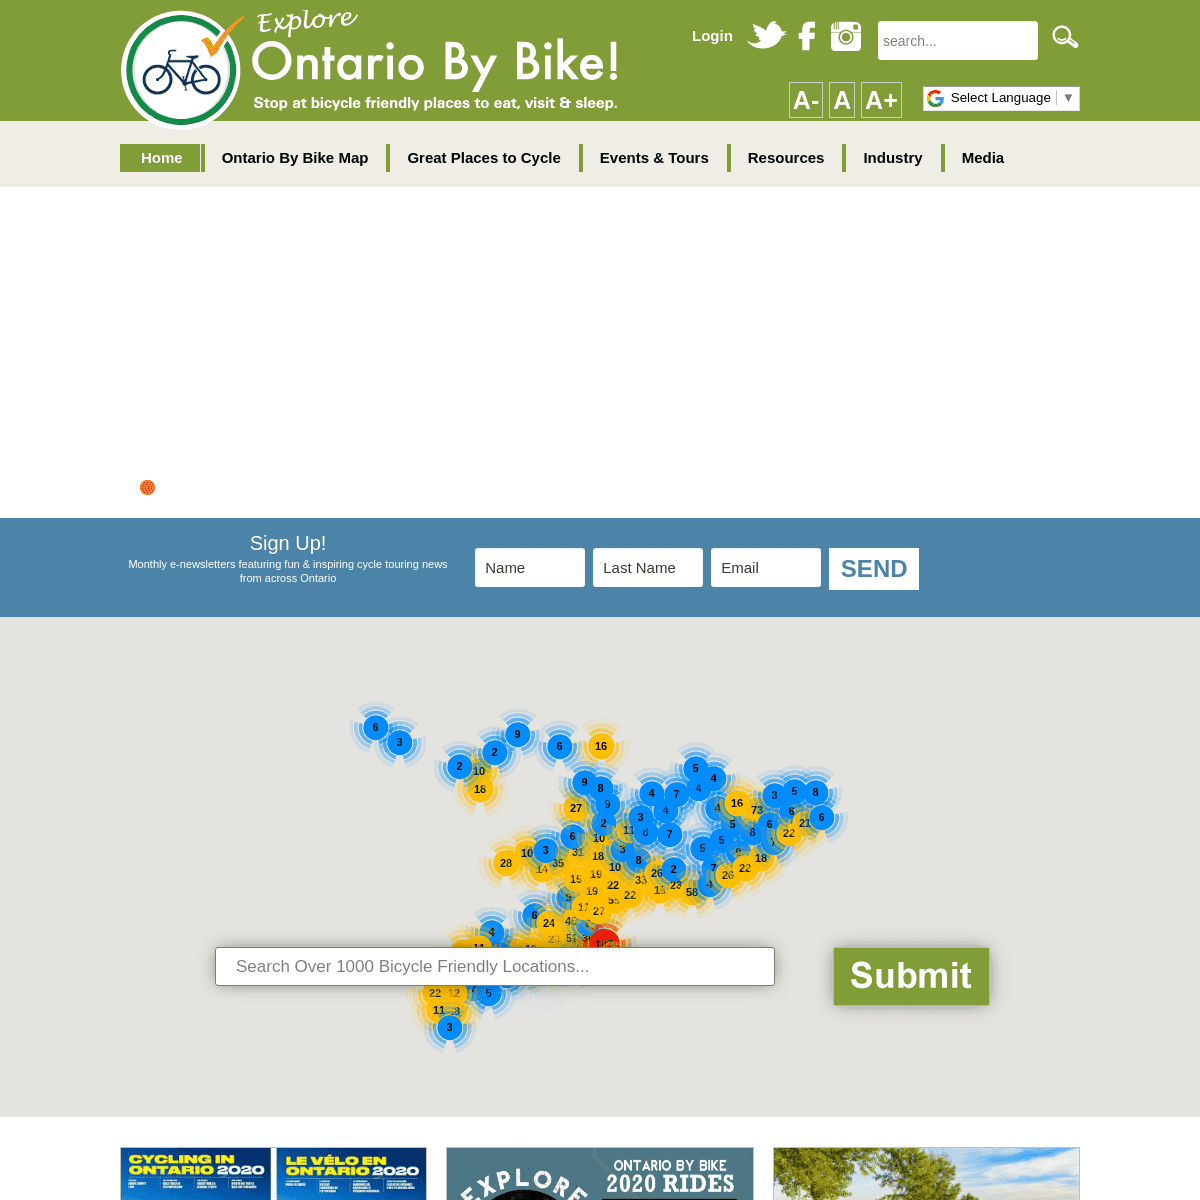 A complete backup of ontariobybike.ca